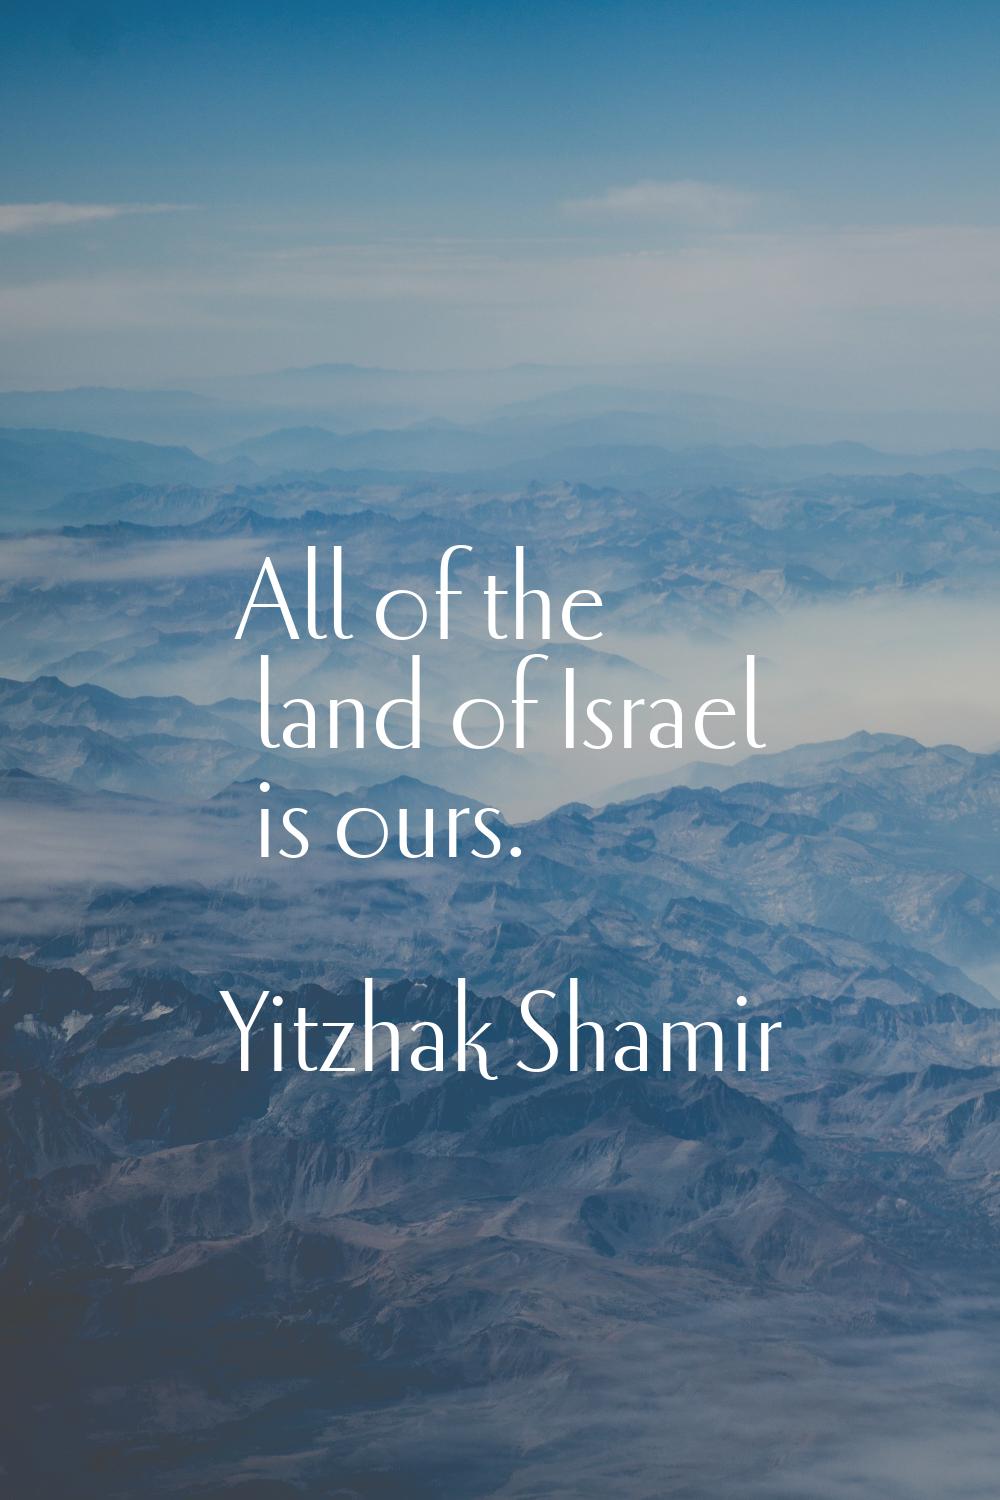 All of the land of Israel is ours.